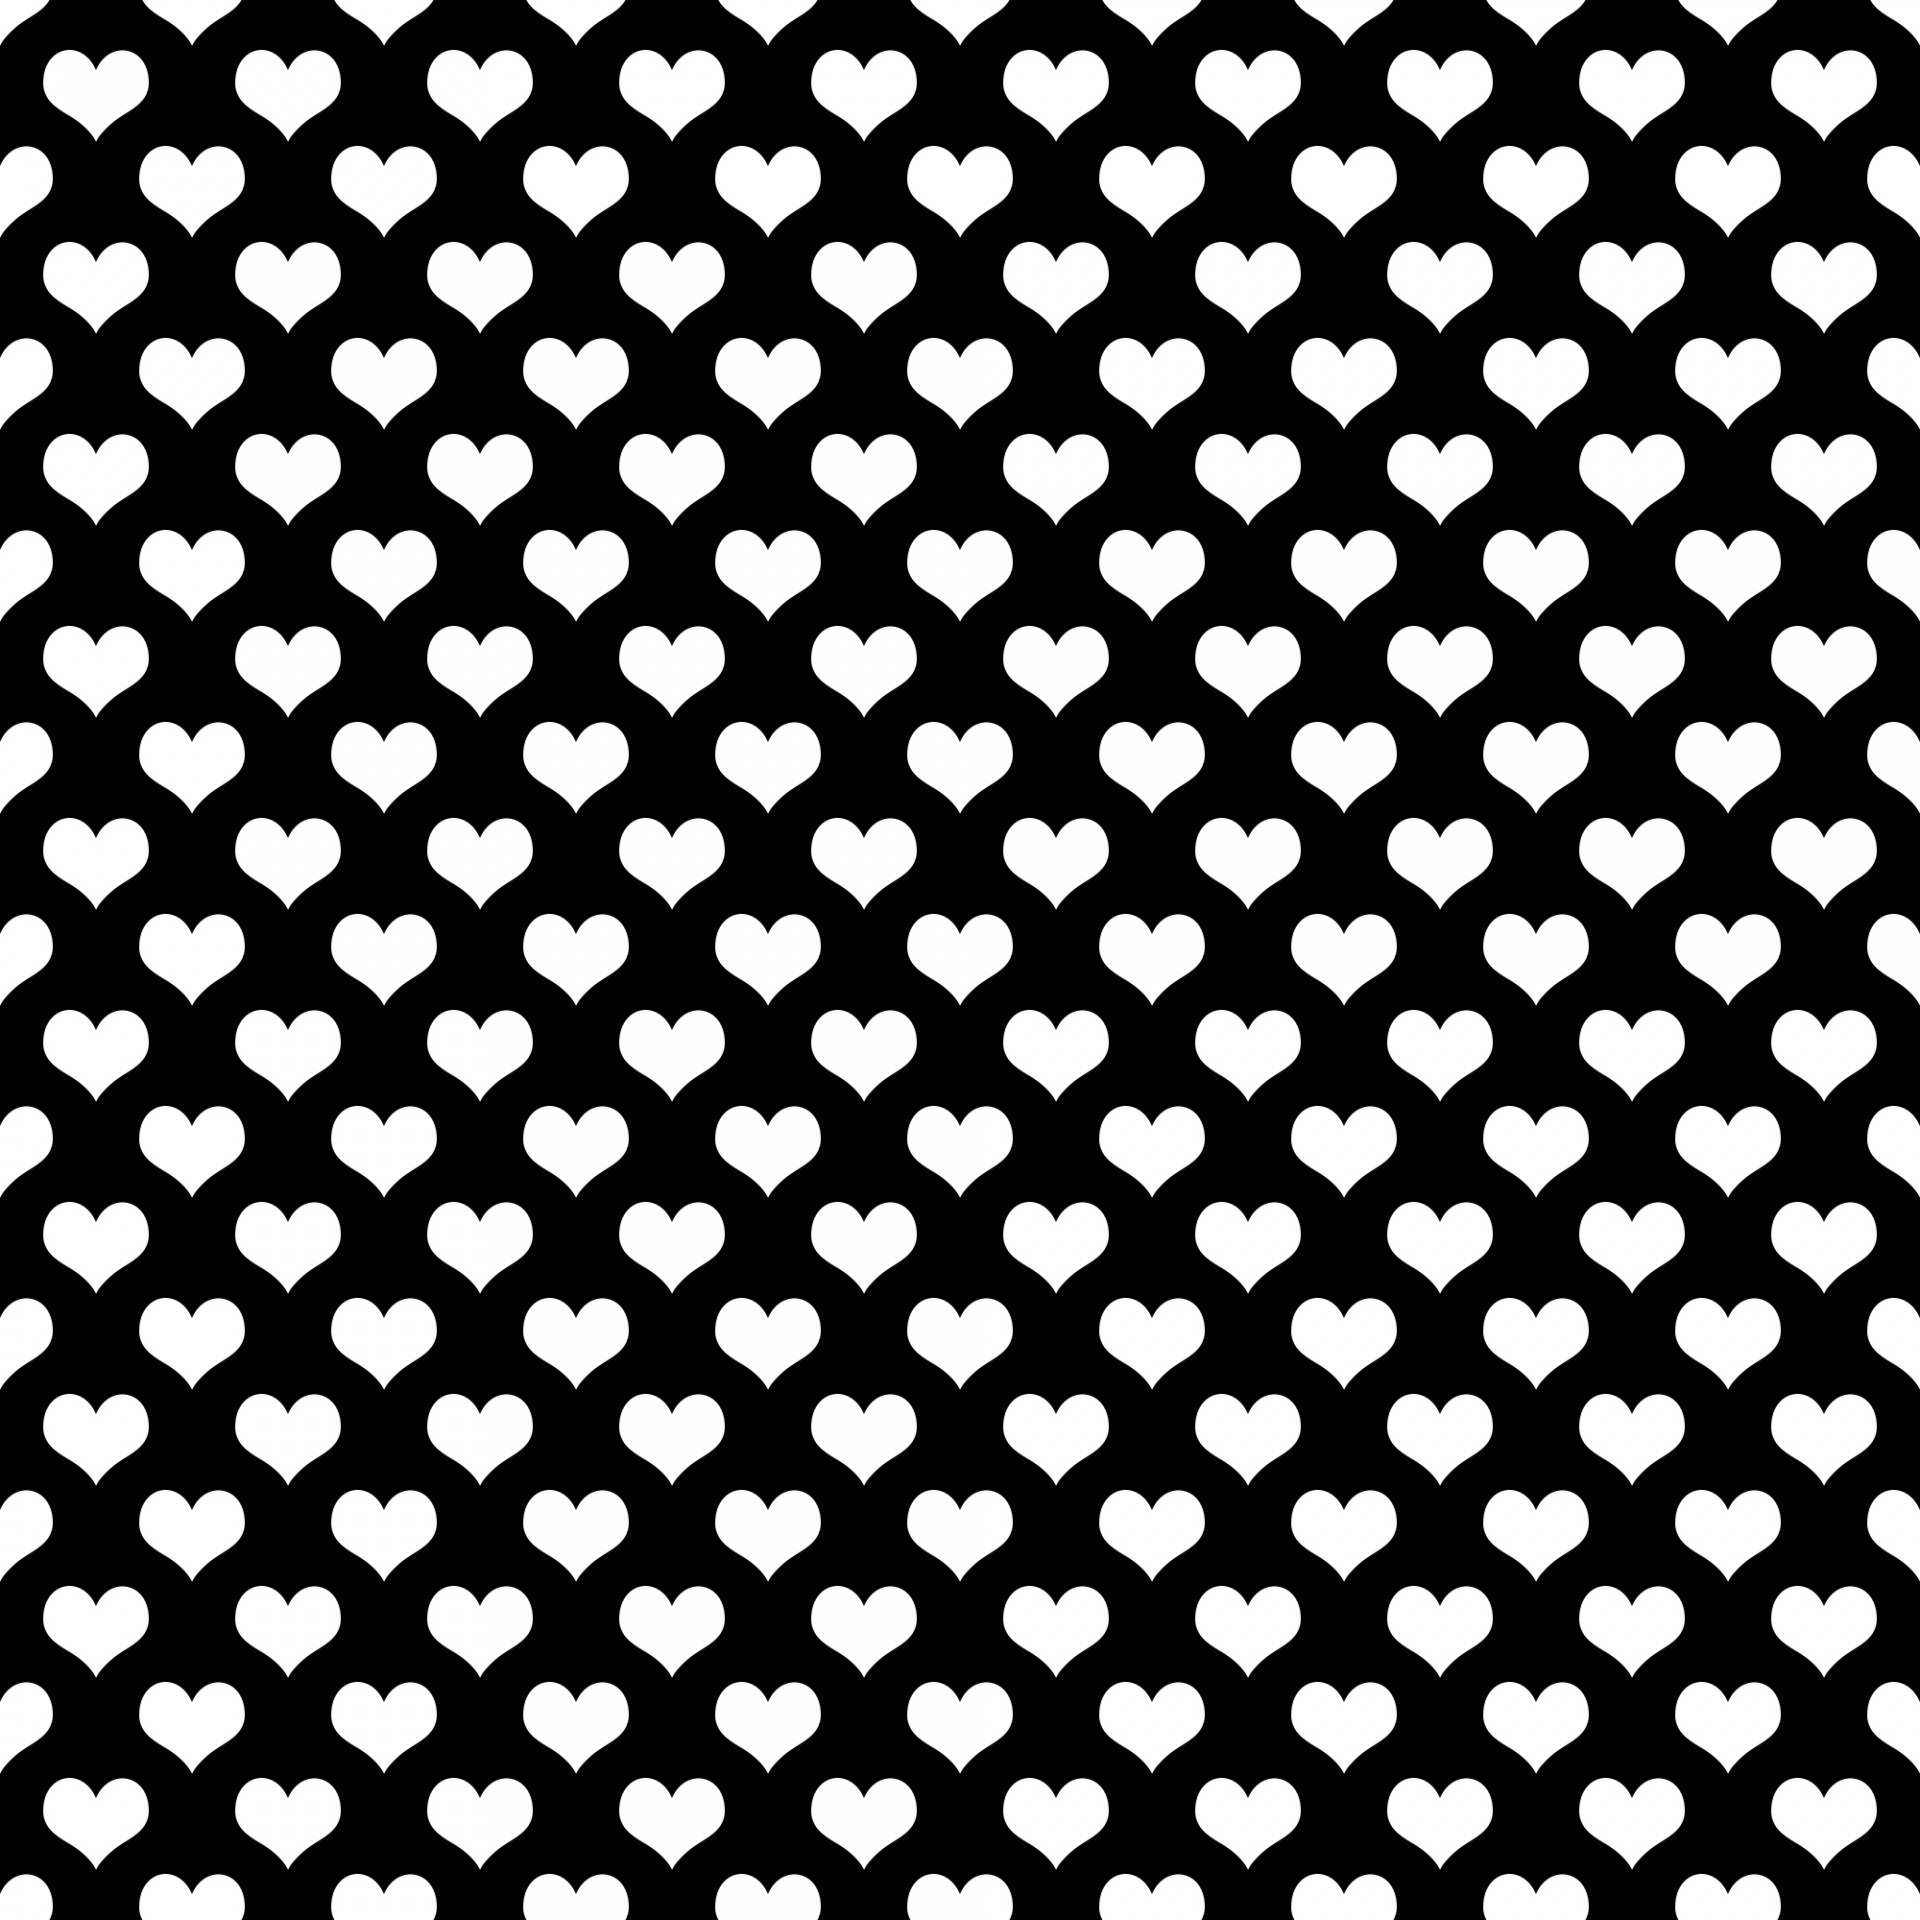 1920x1920 Hearts Background Wallpaper